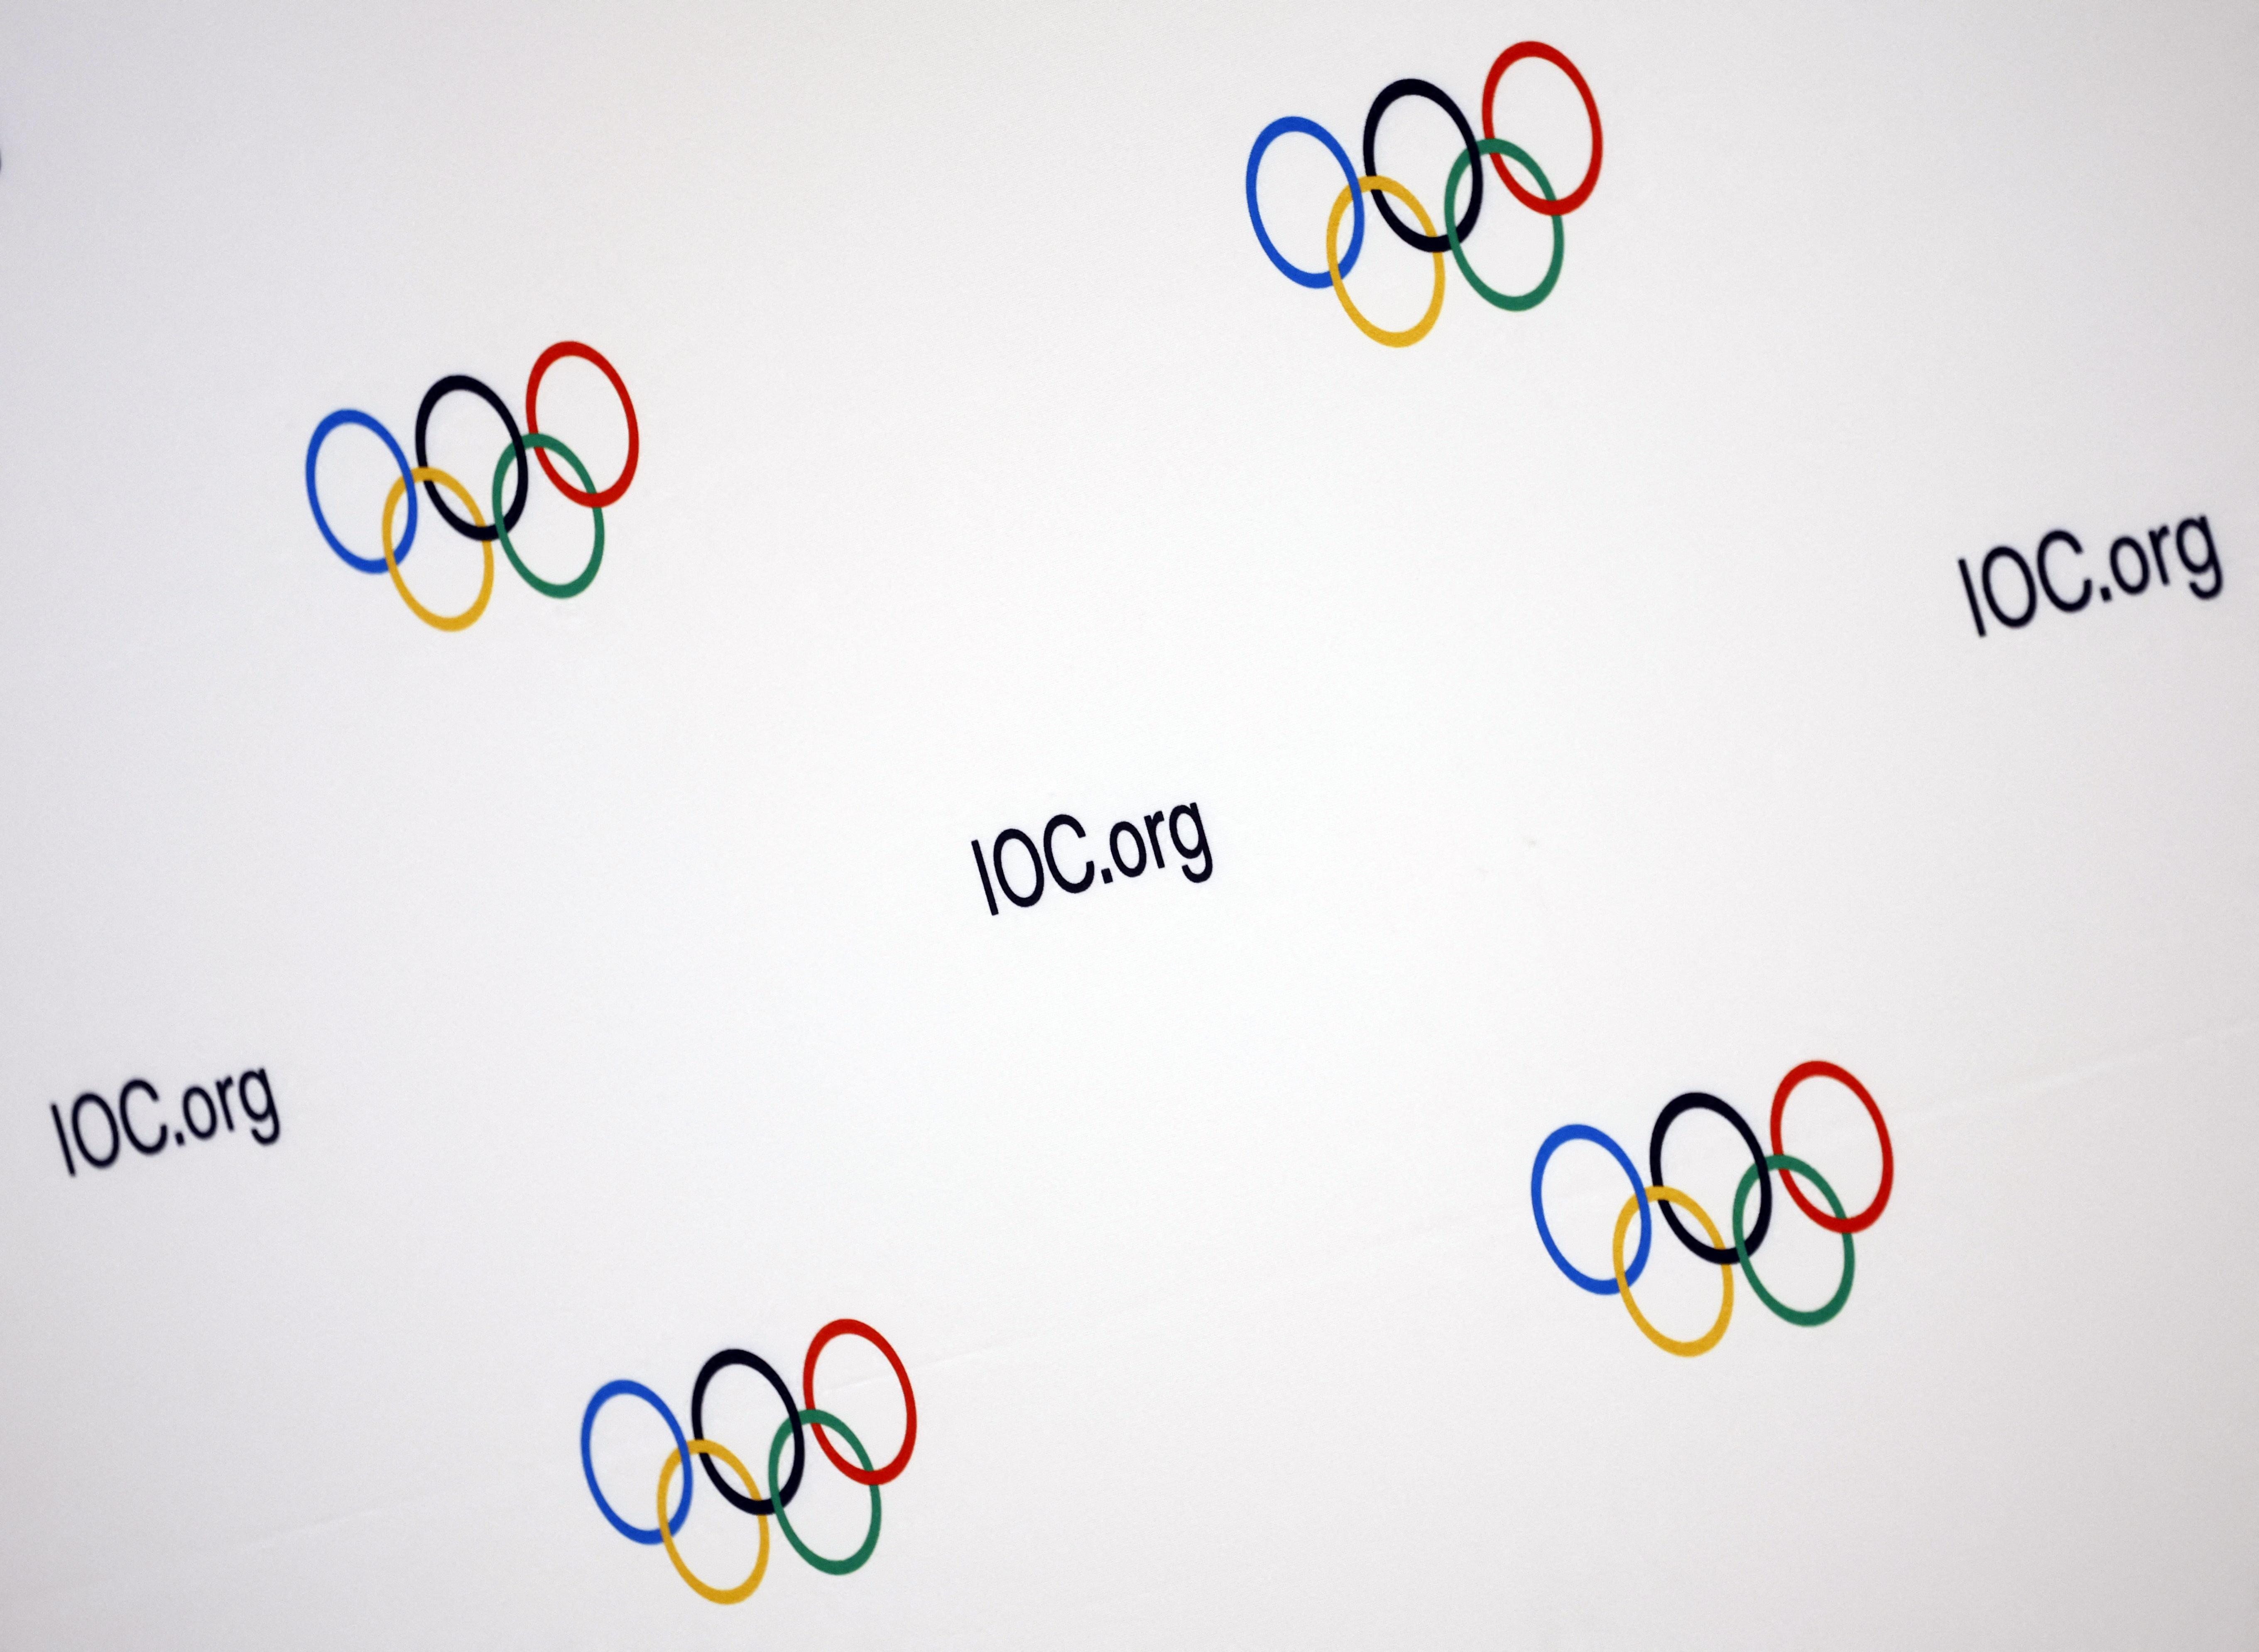 Five interlocked, colored rings make up the Olympic symbol. The rings are  blue, black, red, yellow, and - brainly.com